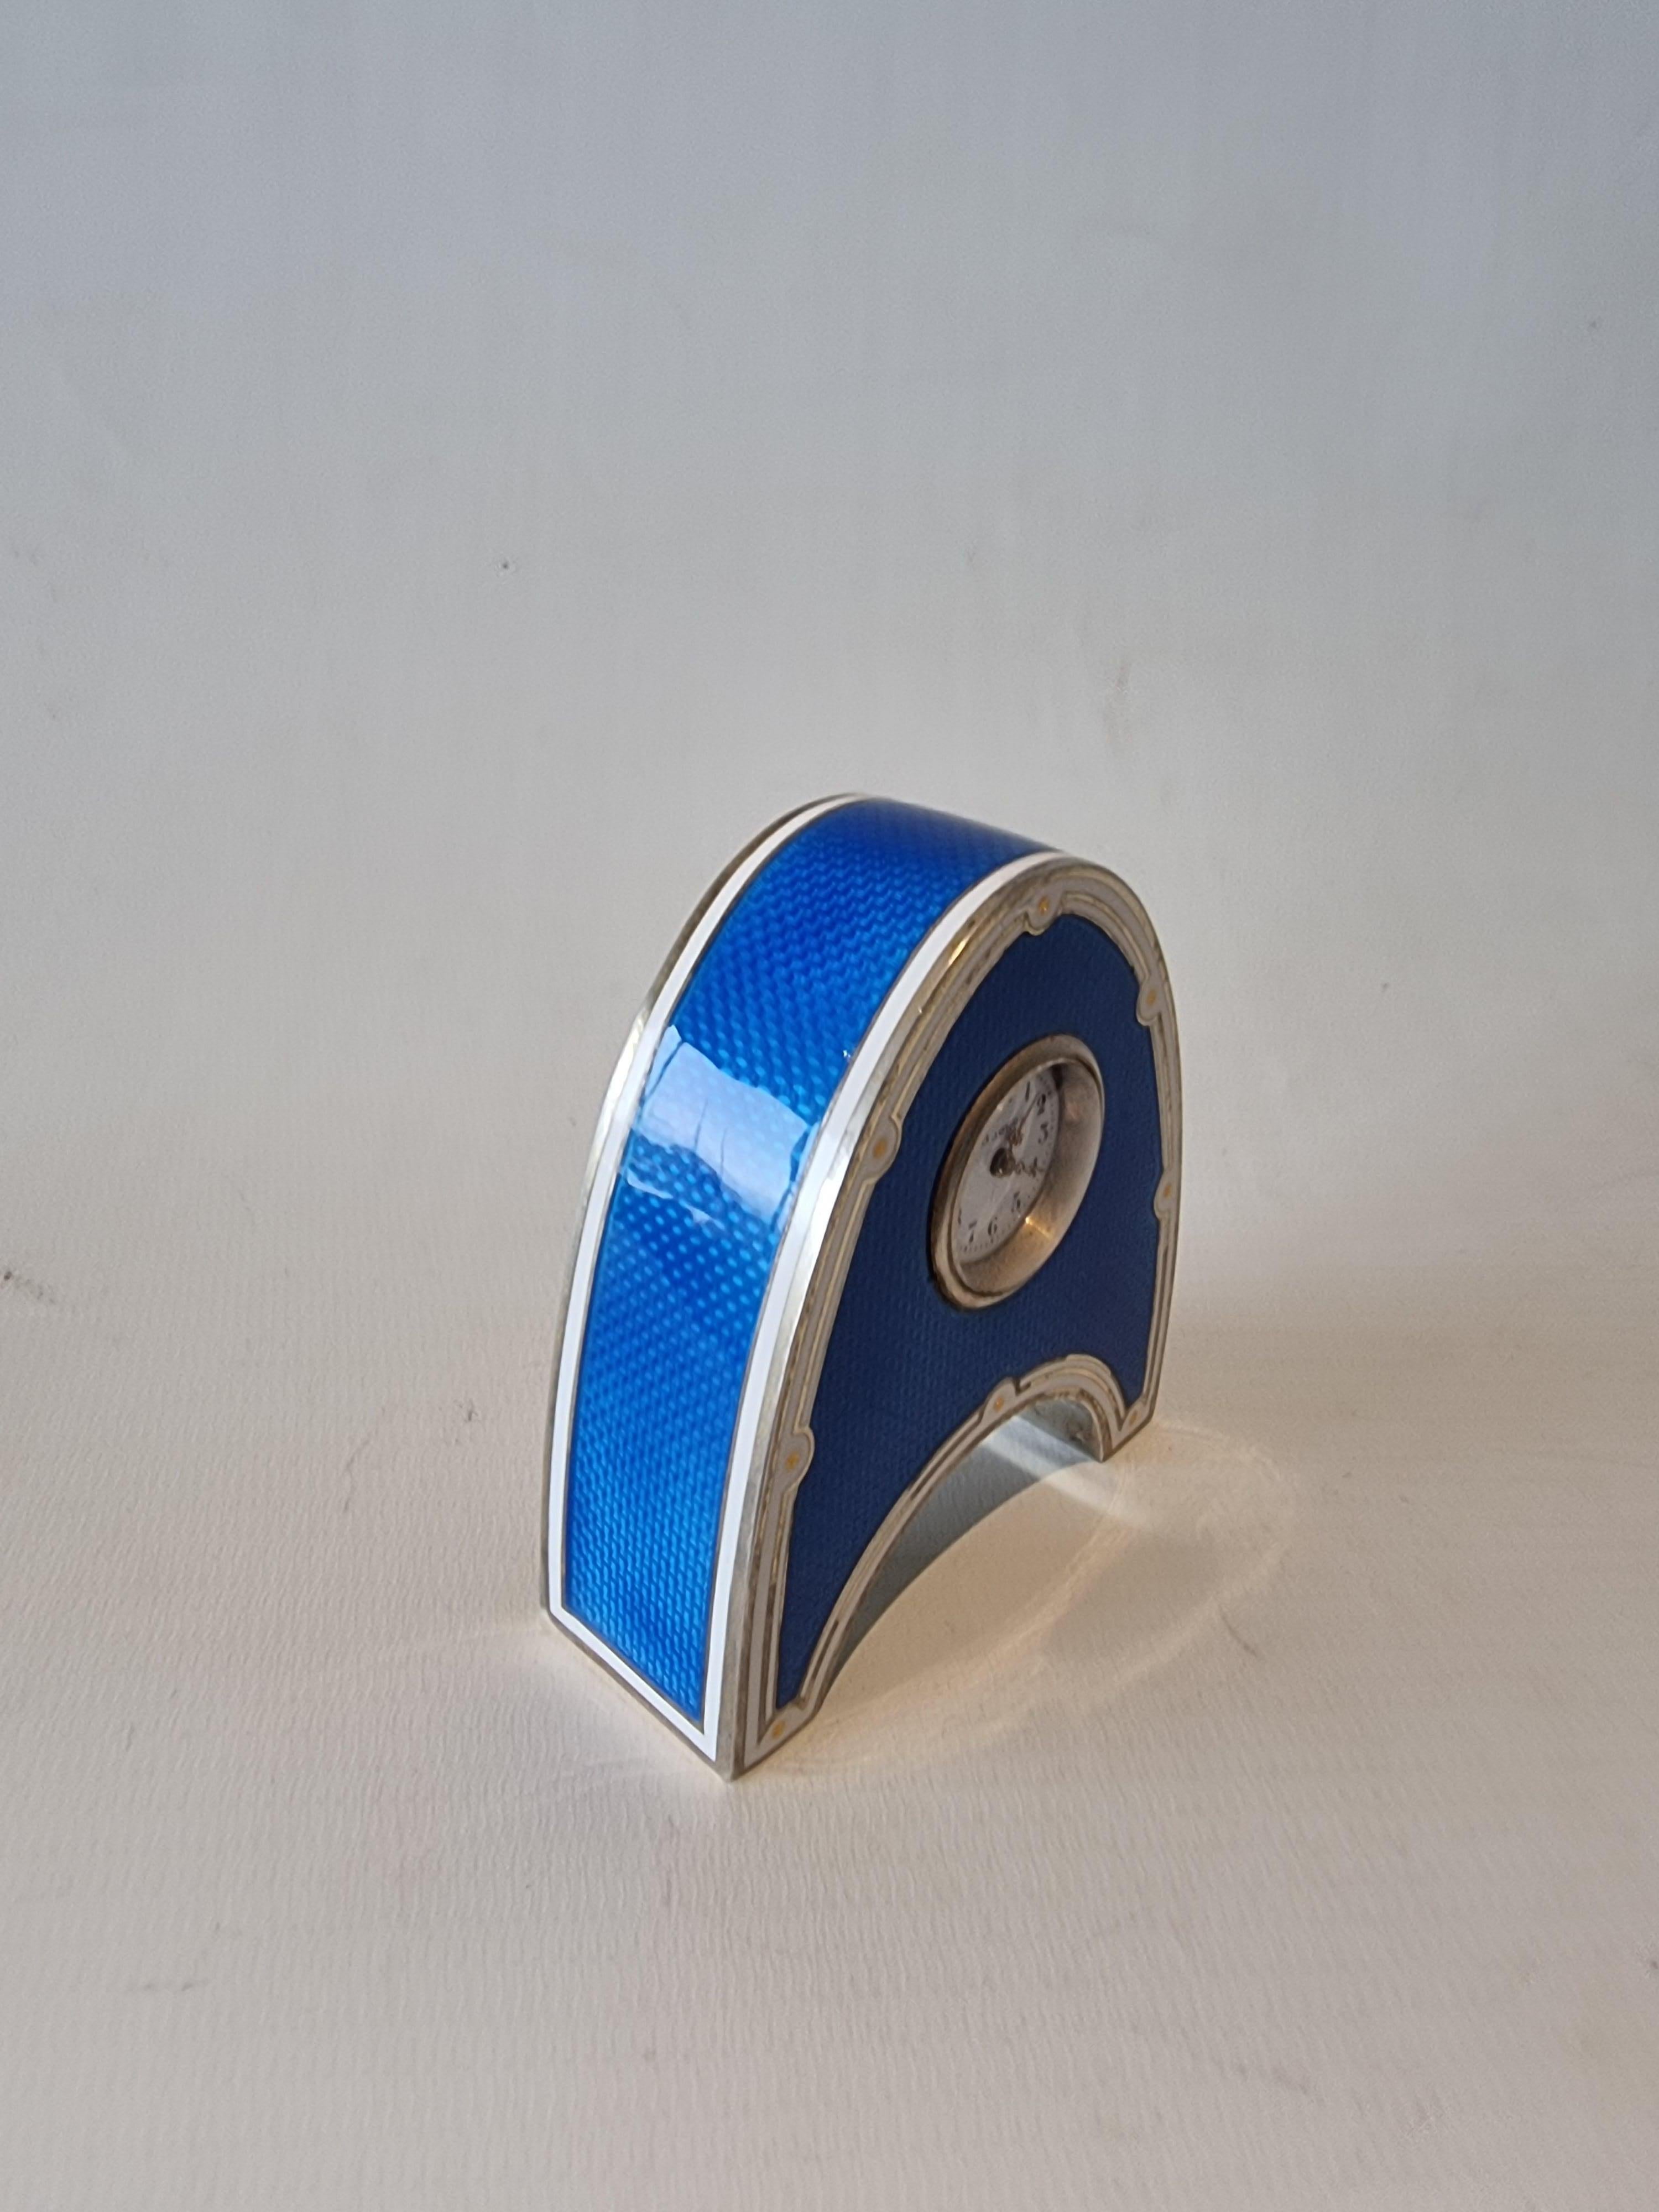 Miniature Silver and Blue Guilloche enamel Borne Carriage or Travel Clock In Good Condition For Sale In London, GB